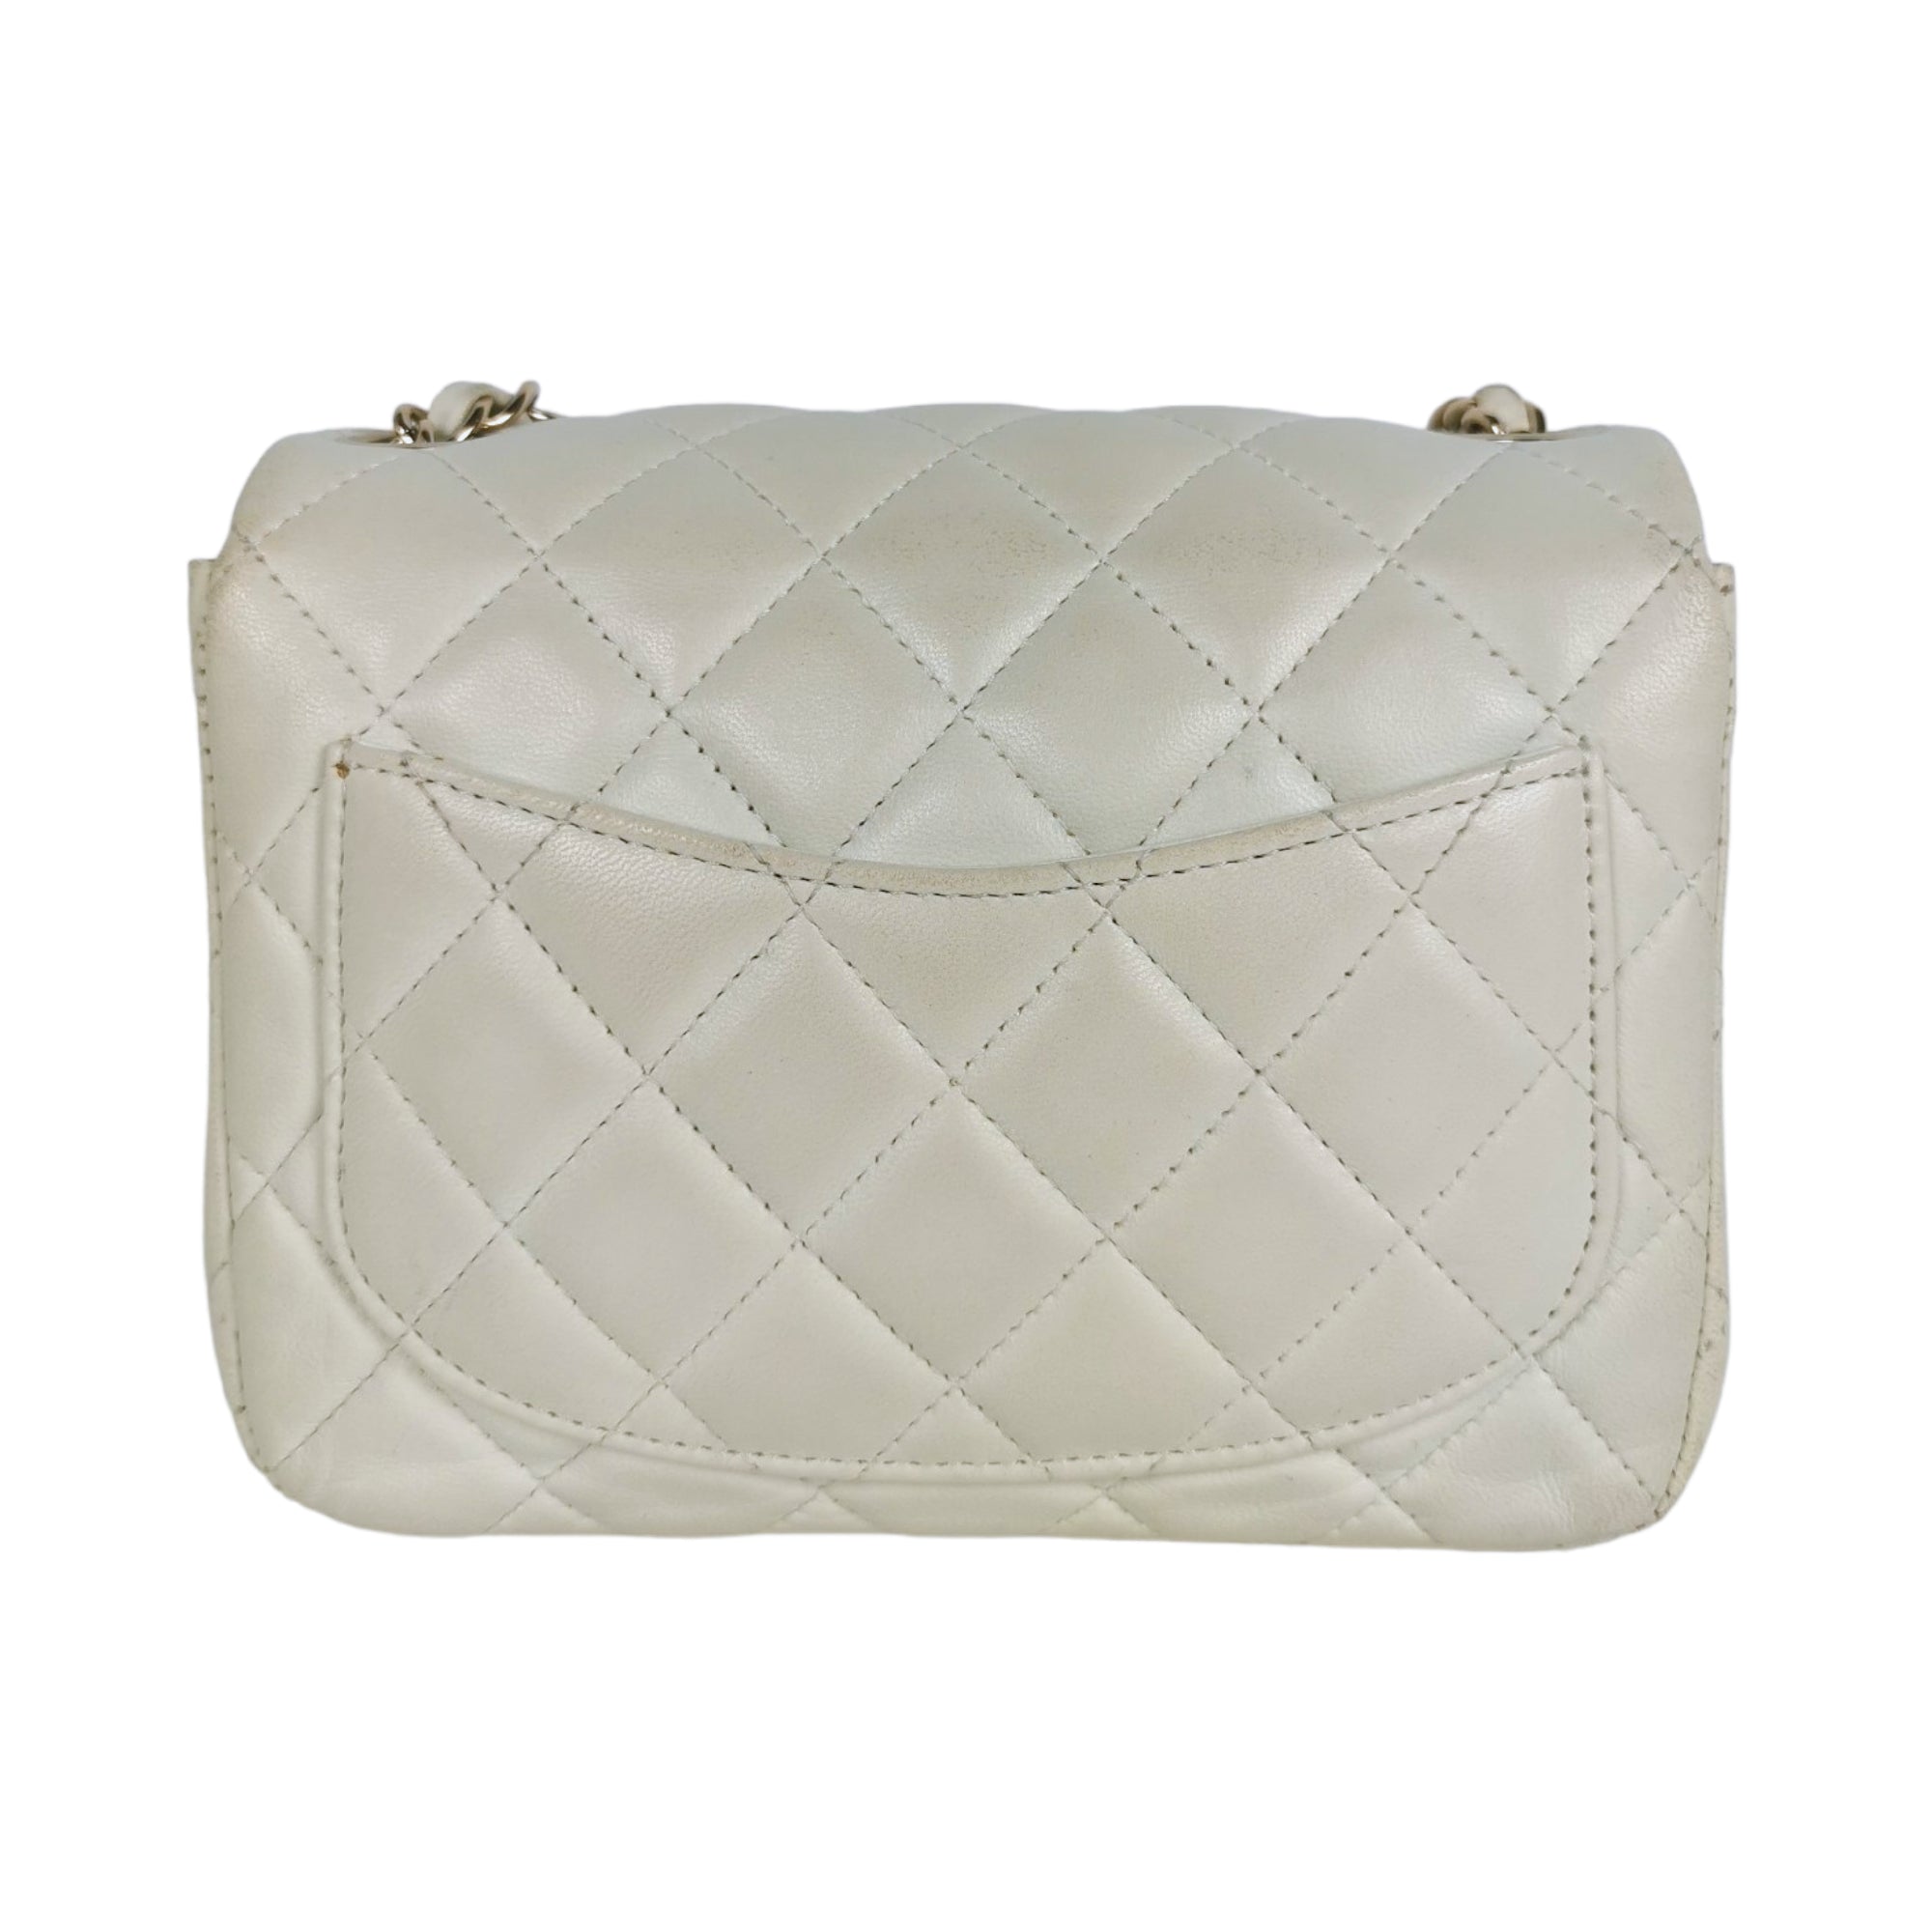 White Quilted Lambskin Mini Square Flap Bag Silver Hardware, 2005-06, Handbags & Accessories, 2022